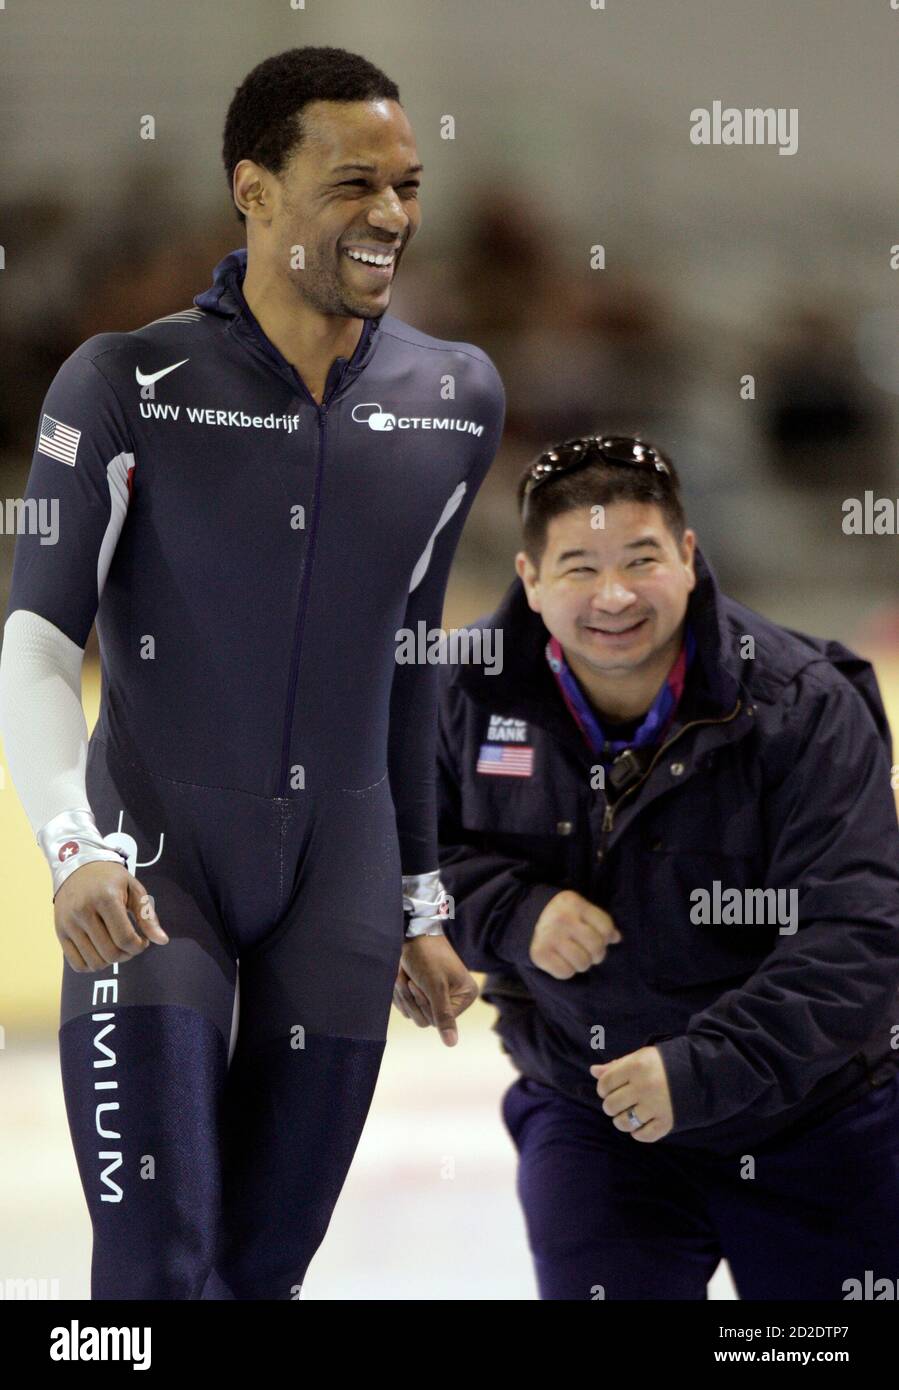 Shani Davis (L) of the U.S. celebrates with his coach Ryan Shimabukuro  after setting the new world record in the men's 1000 m speed skating at the  ISU World Cup Speed Skating